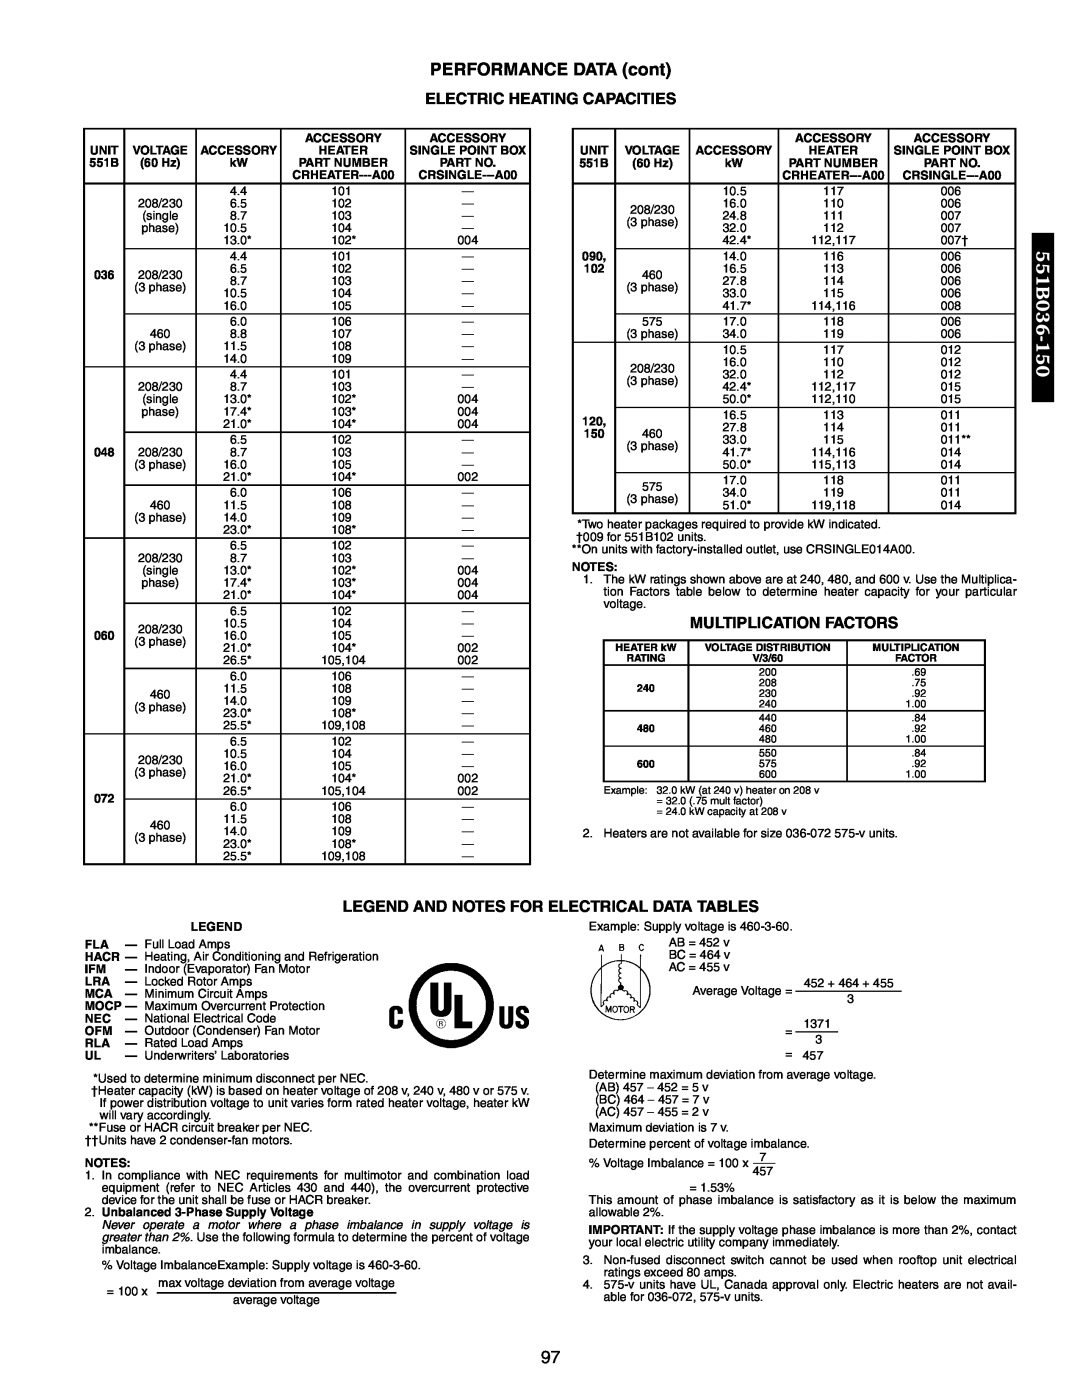 Bryant 558F Legend And Notes For Electrical Data Tables, PERFORMANCE DATA cont, Electric Heating Capacities, 551B036 